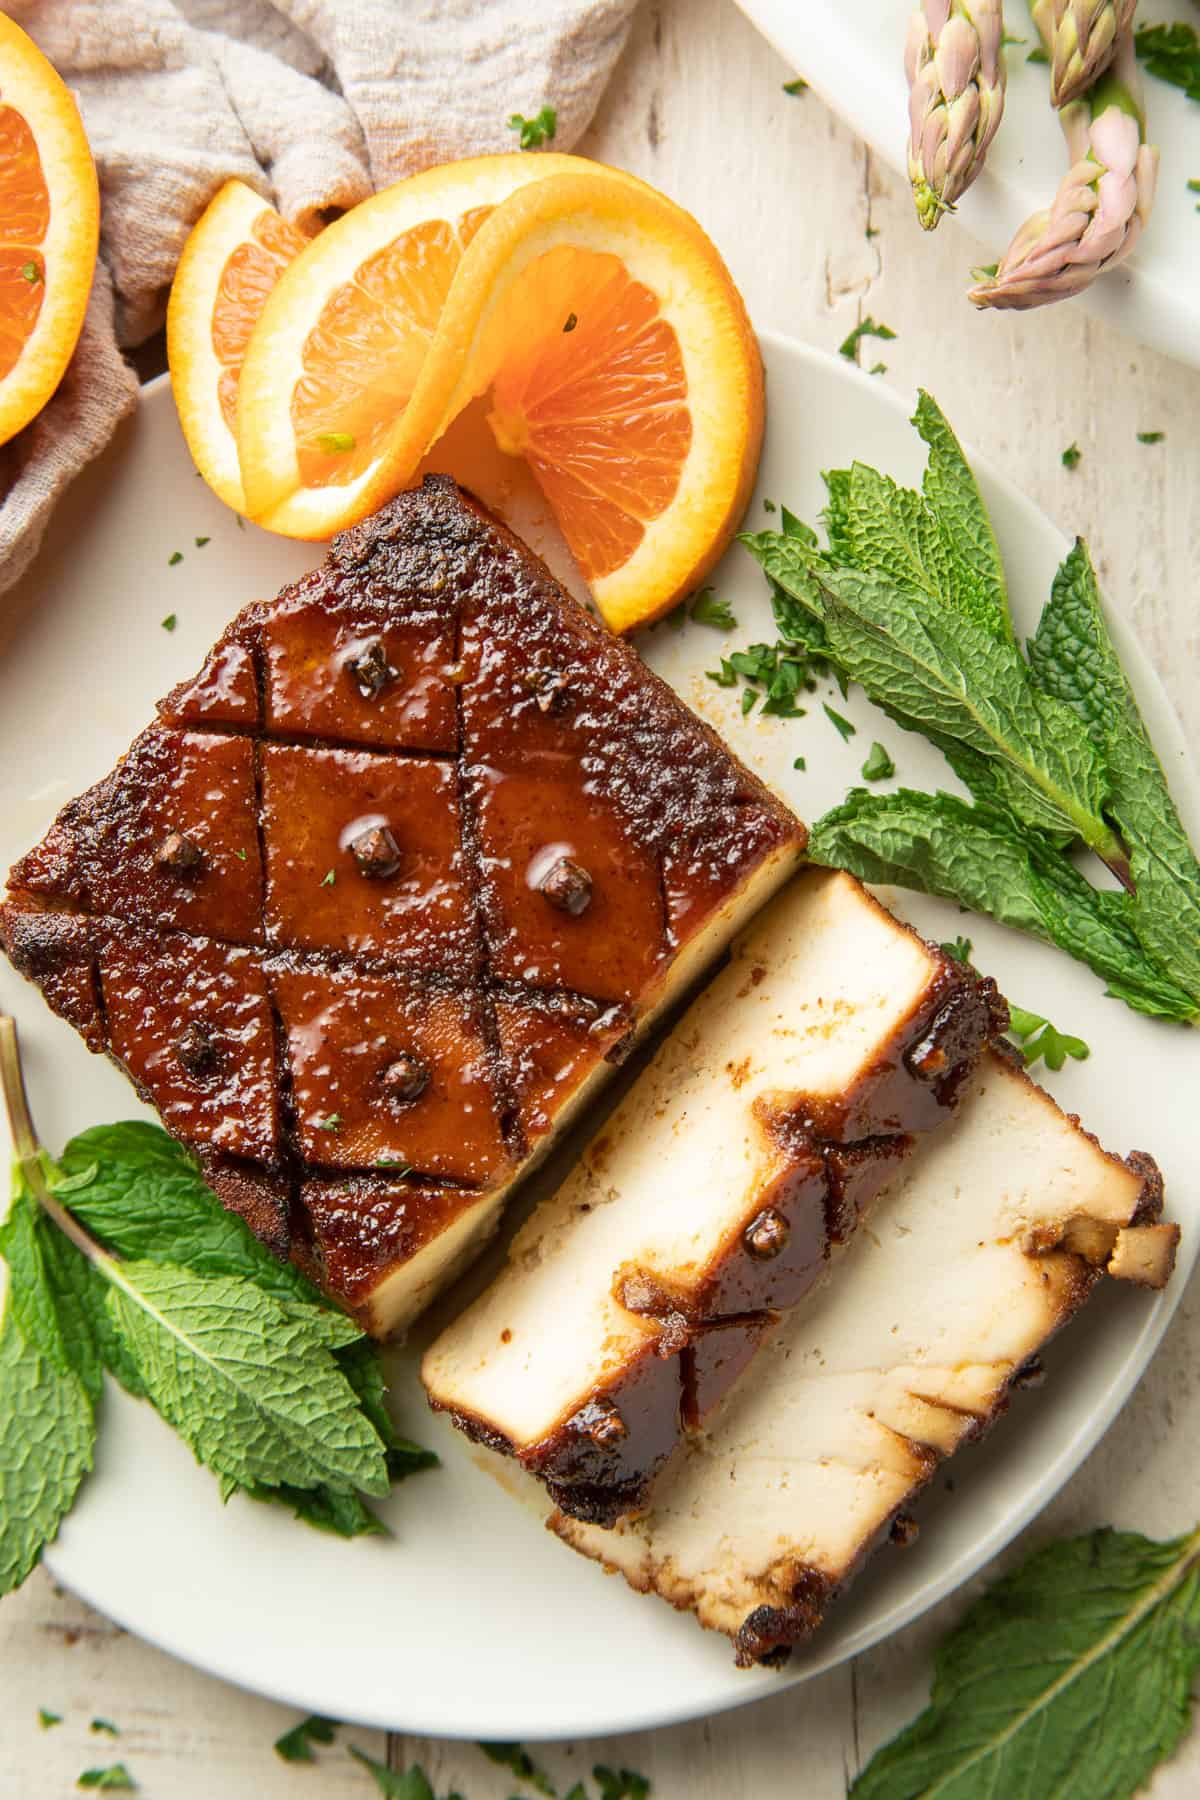 White wooden surface set with oranges, mint leaves and partially sliced tofu roast.